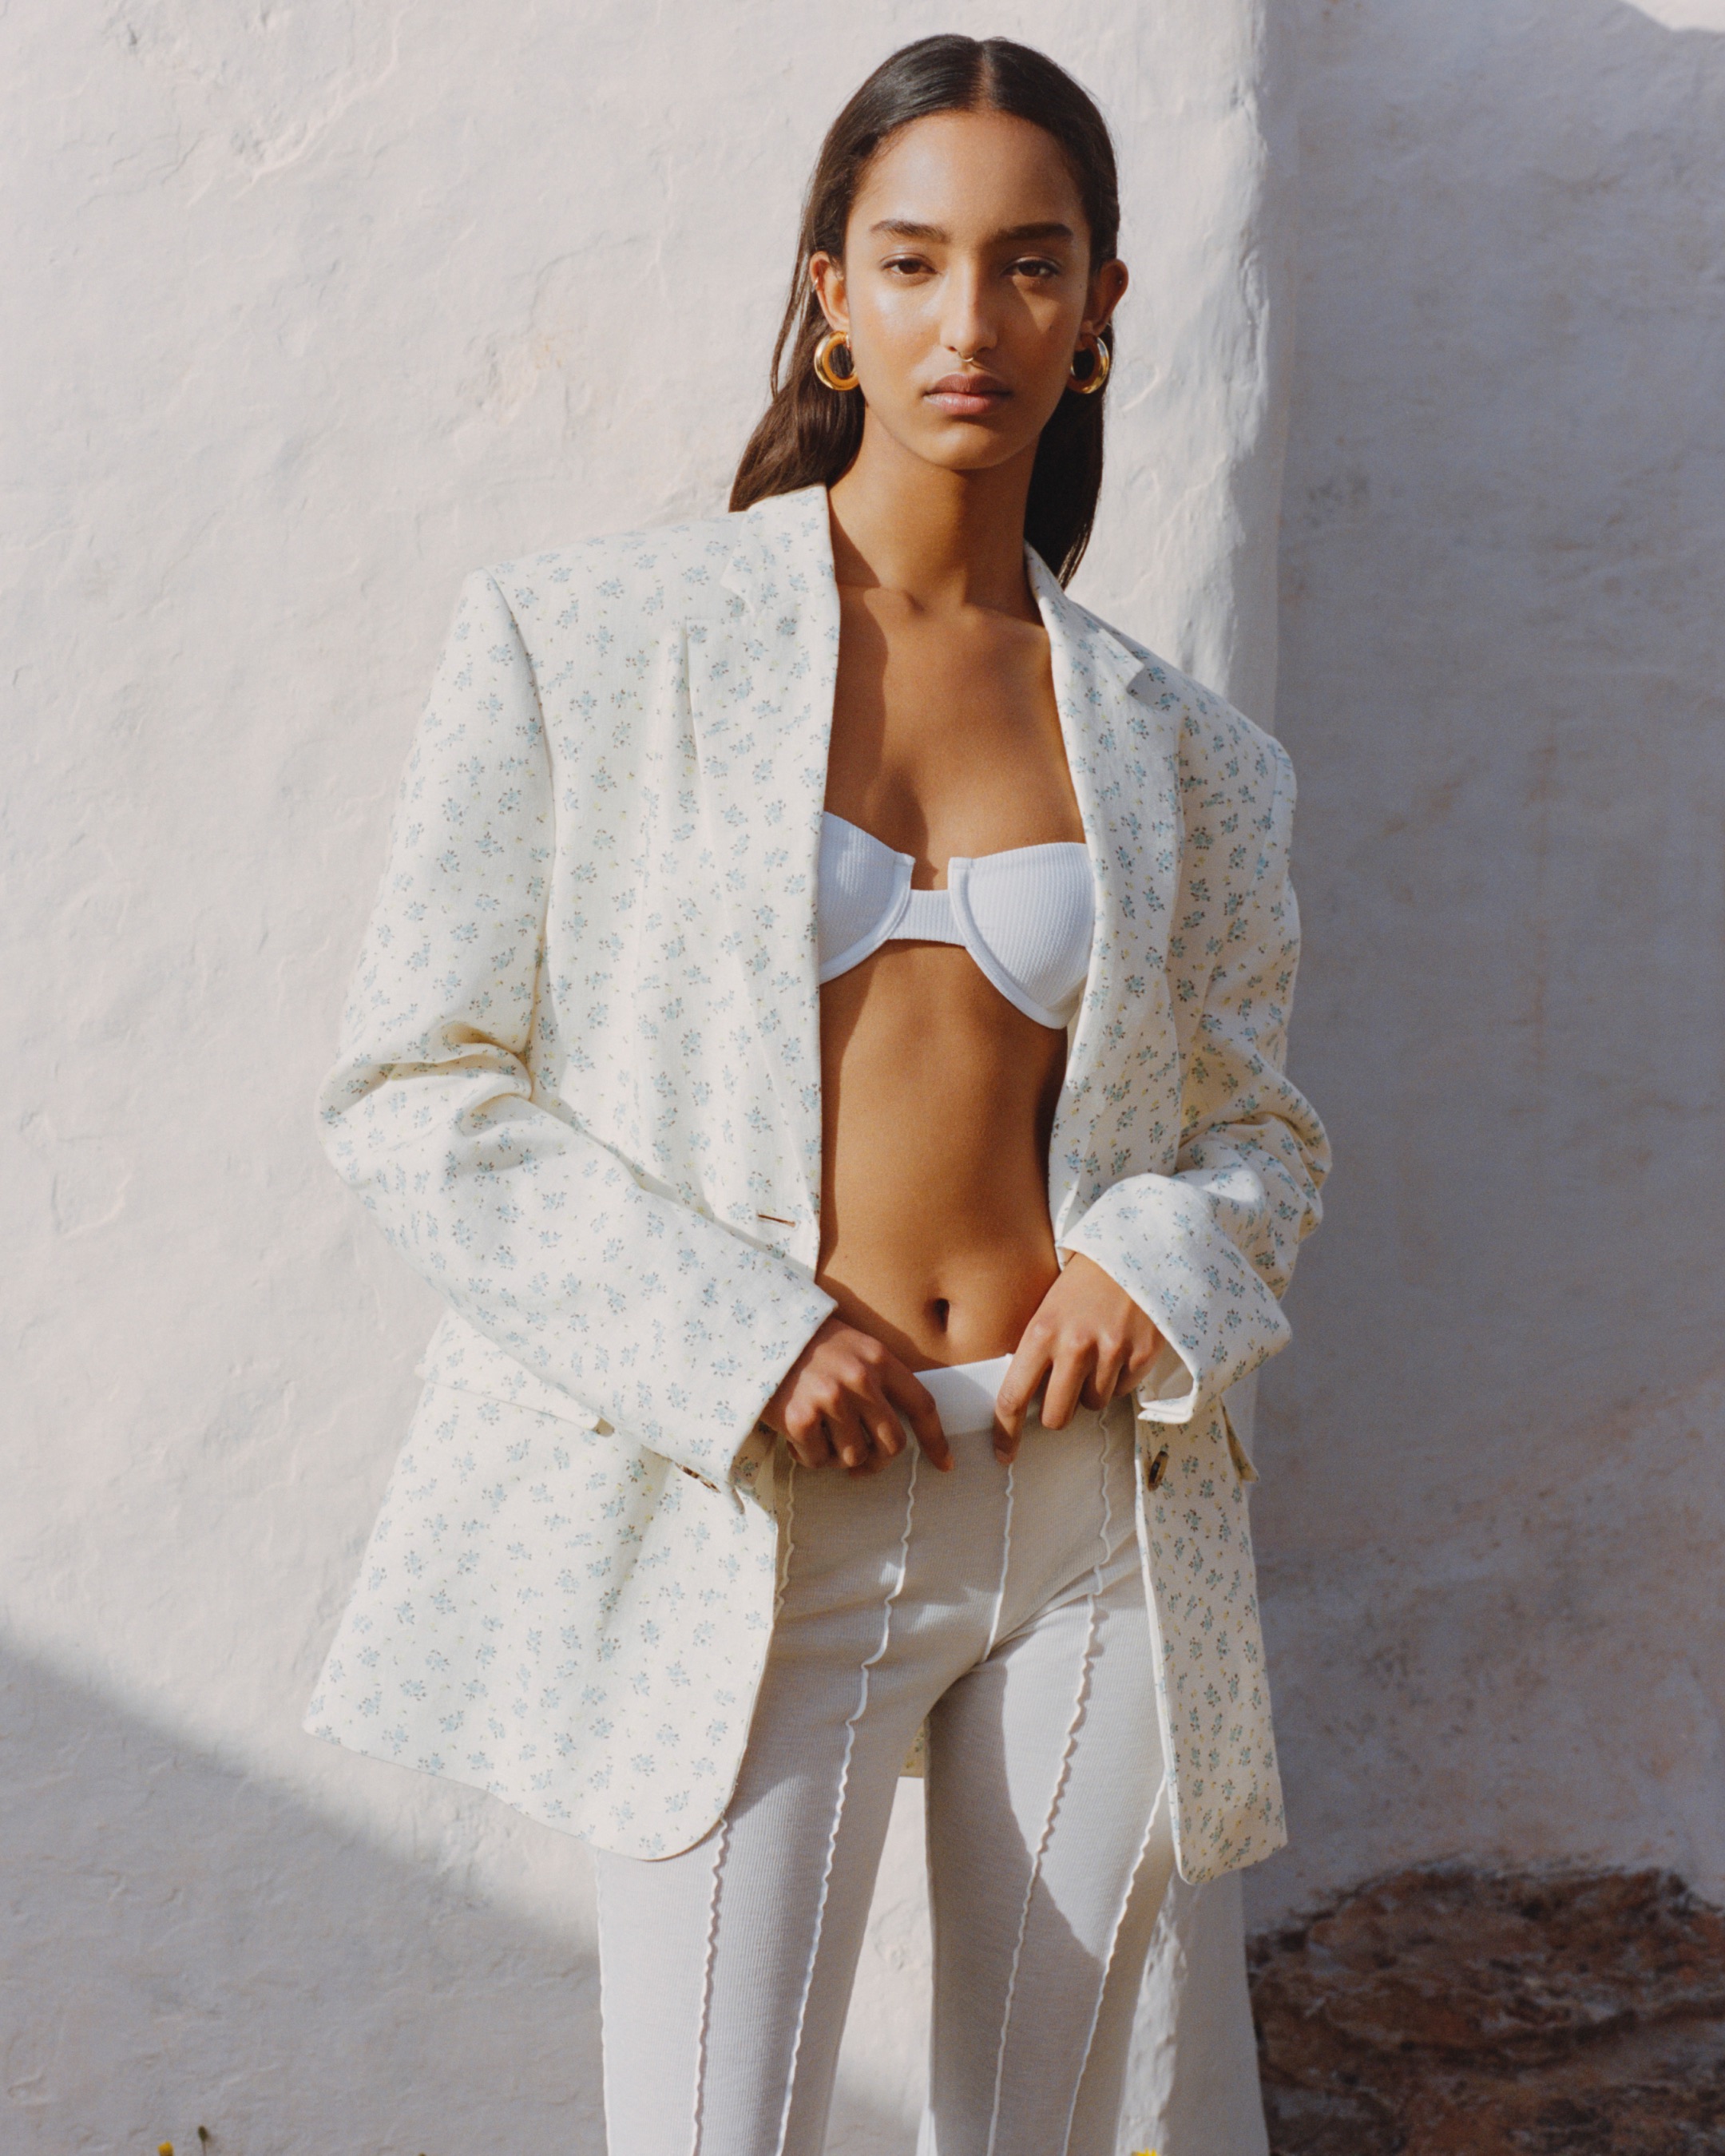 Mango Summer 2022 Collection: Mango’s Rustic Outdoors collection is precisely what I want to wear this summer